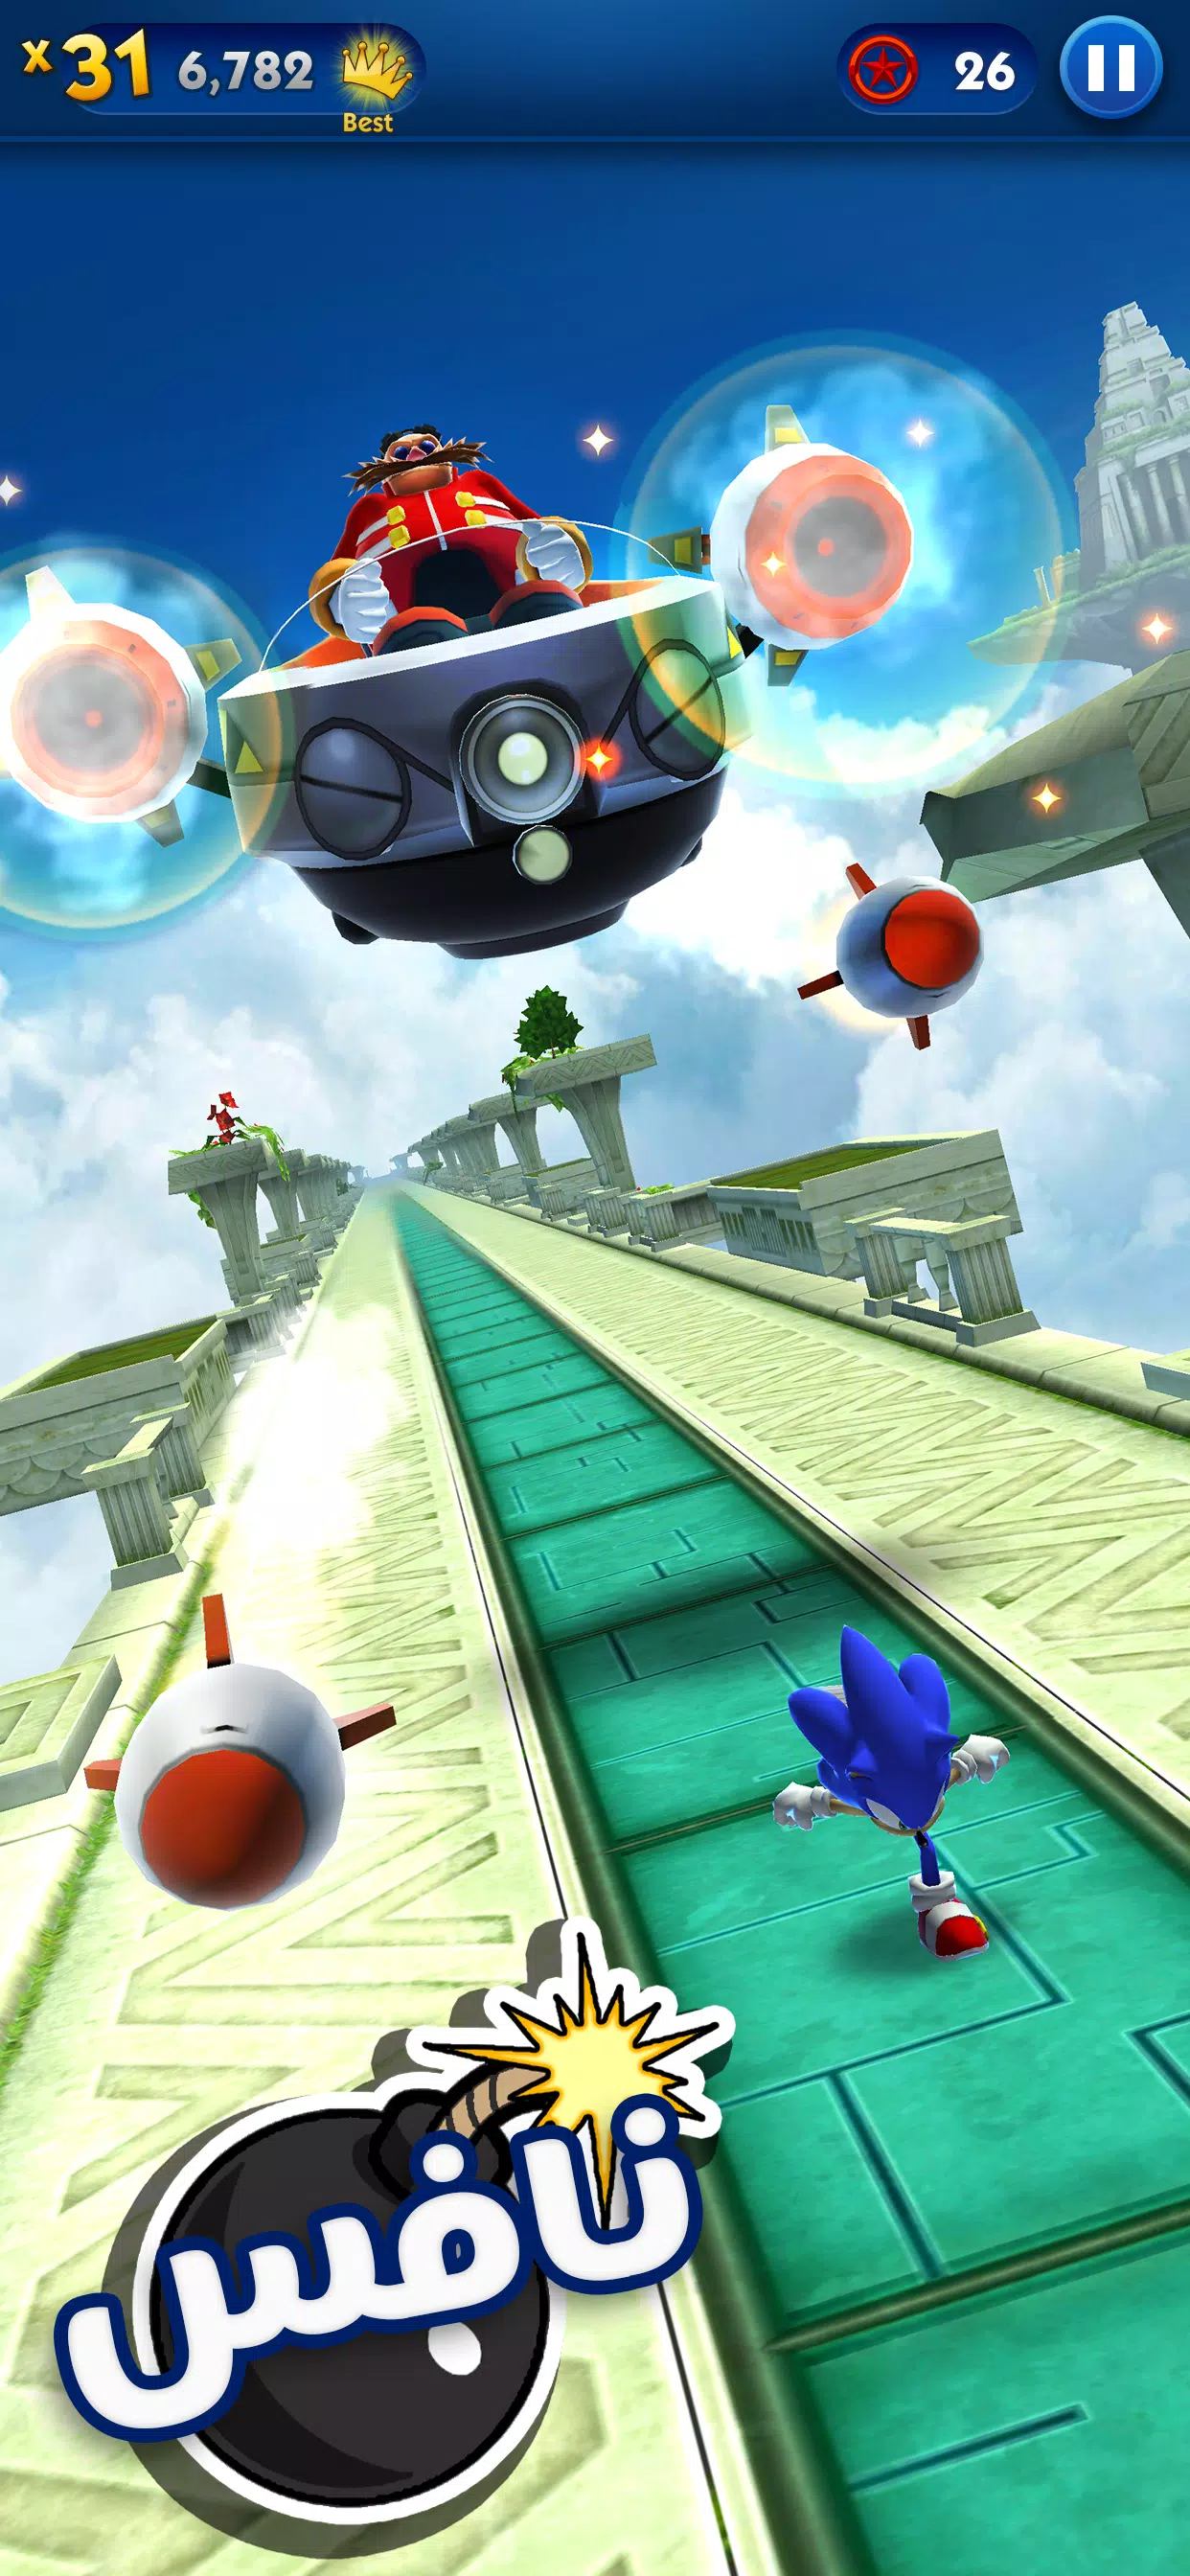 Sonic Dash - لعبة الجري for Android - APK Download